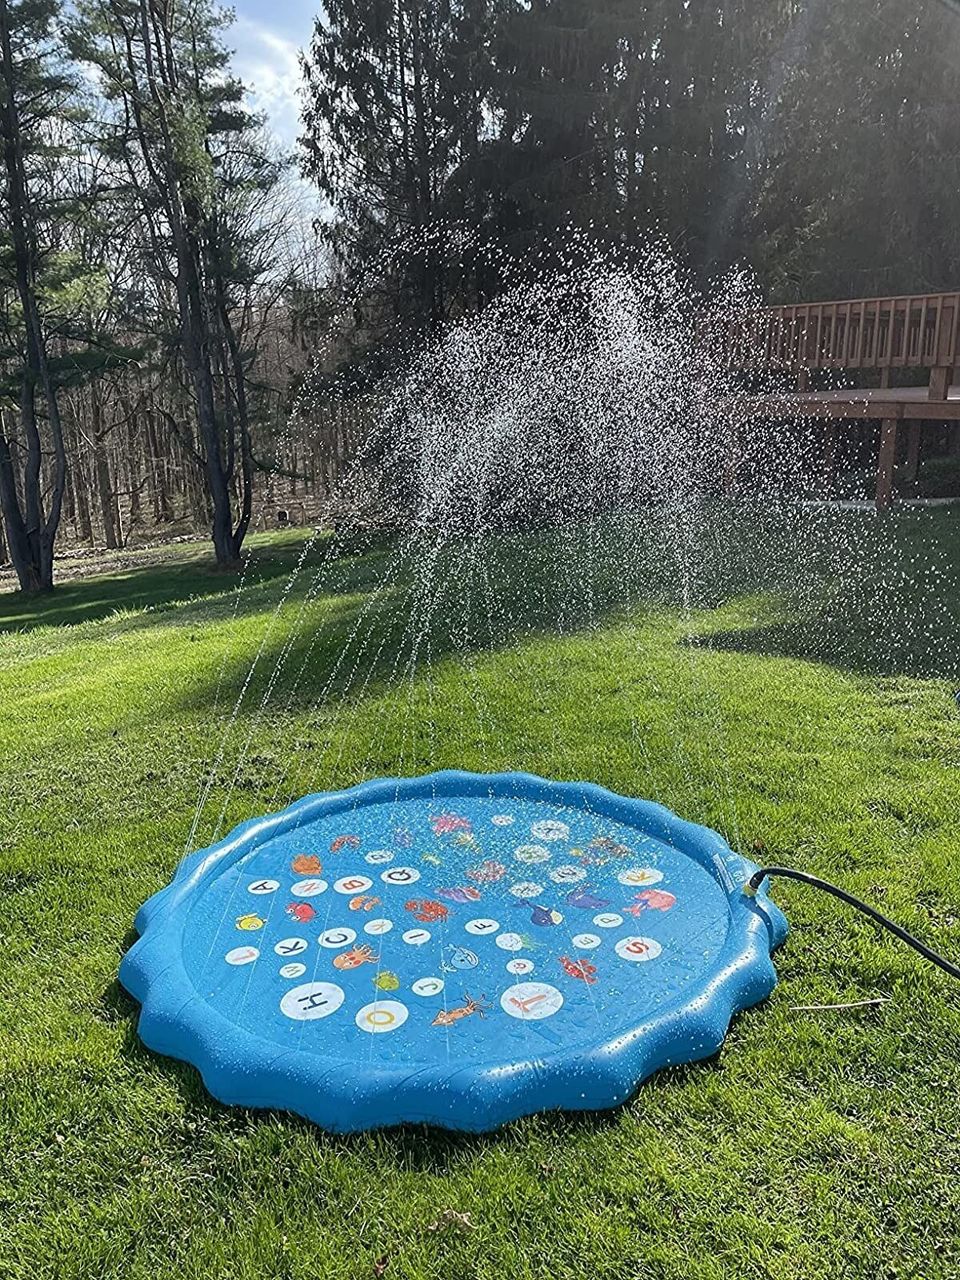 A budget-friendly 3-in-1 sprinkler, splash pad and wading pool